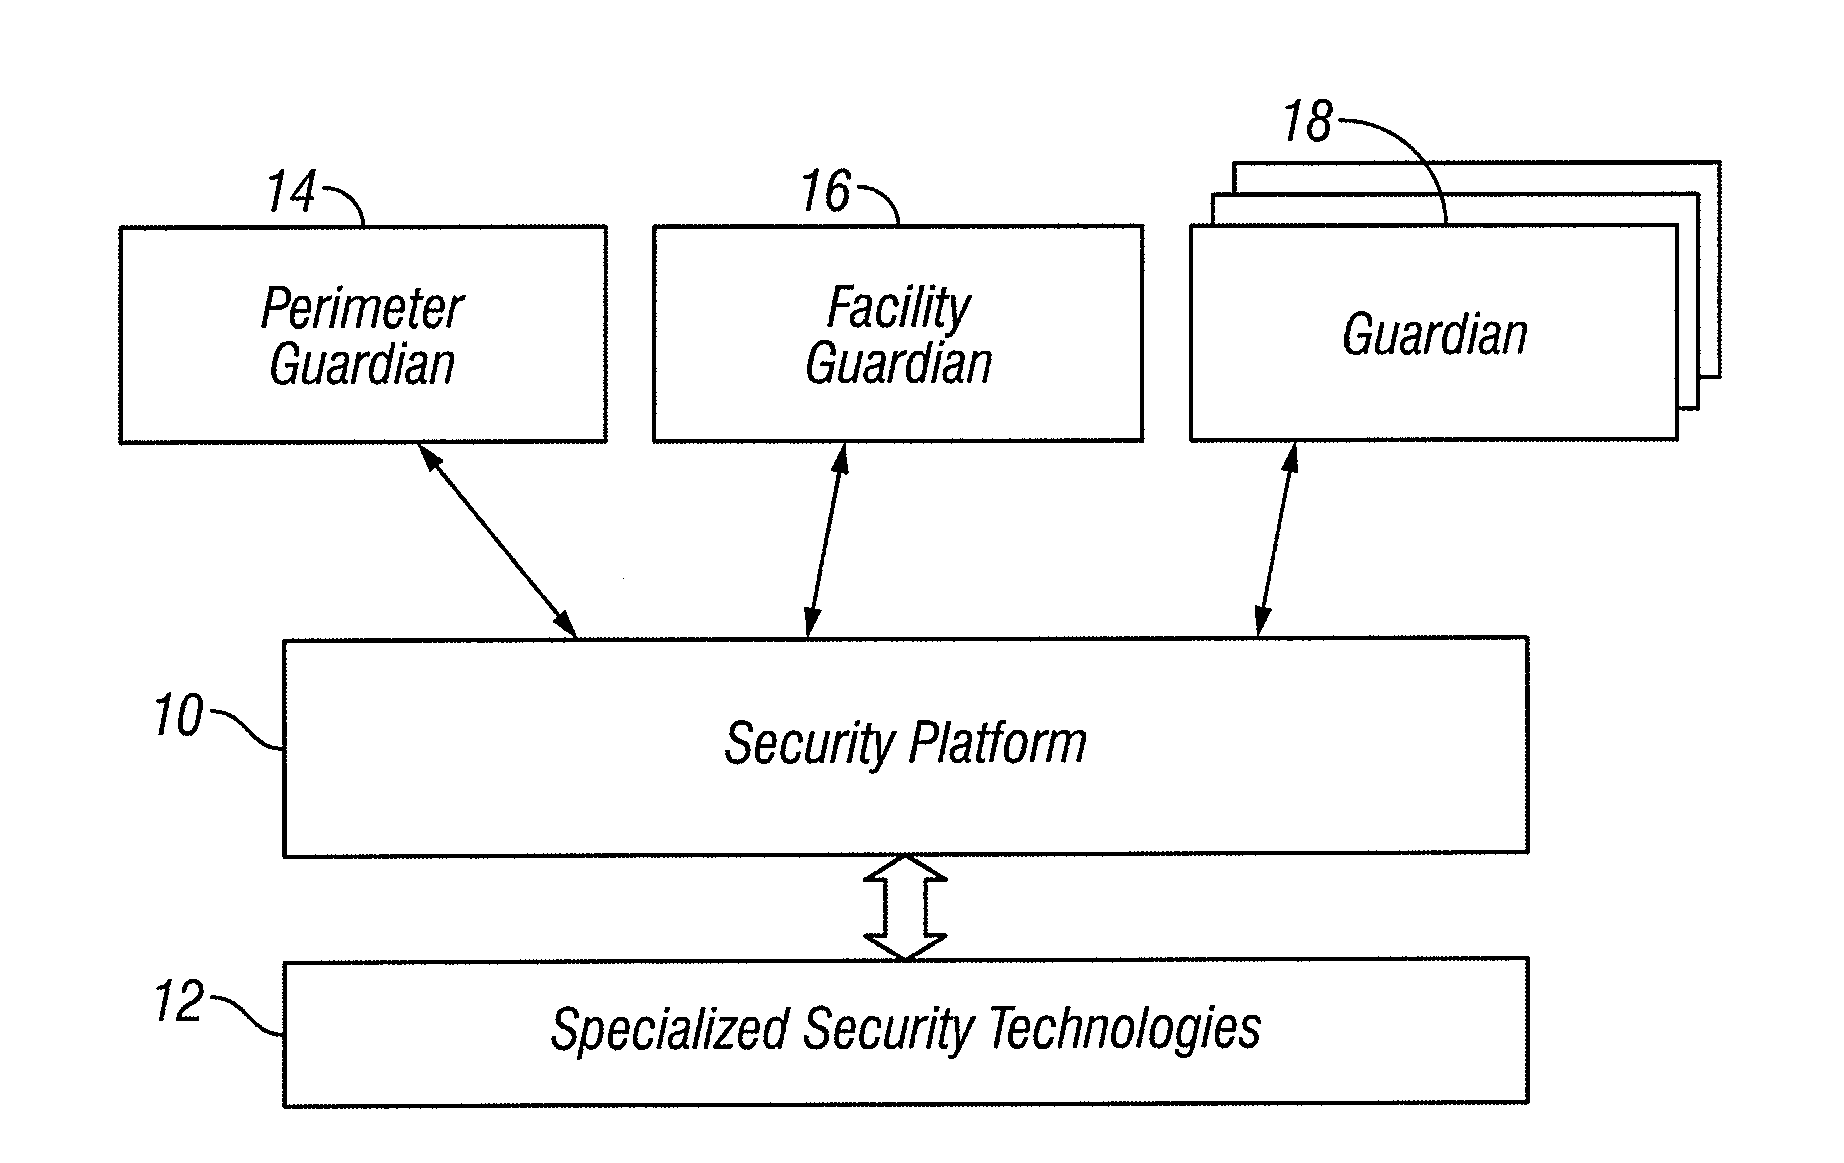 Automated Adaption Based Upon Prevailing Threat Levels in a Security System